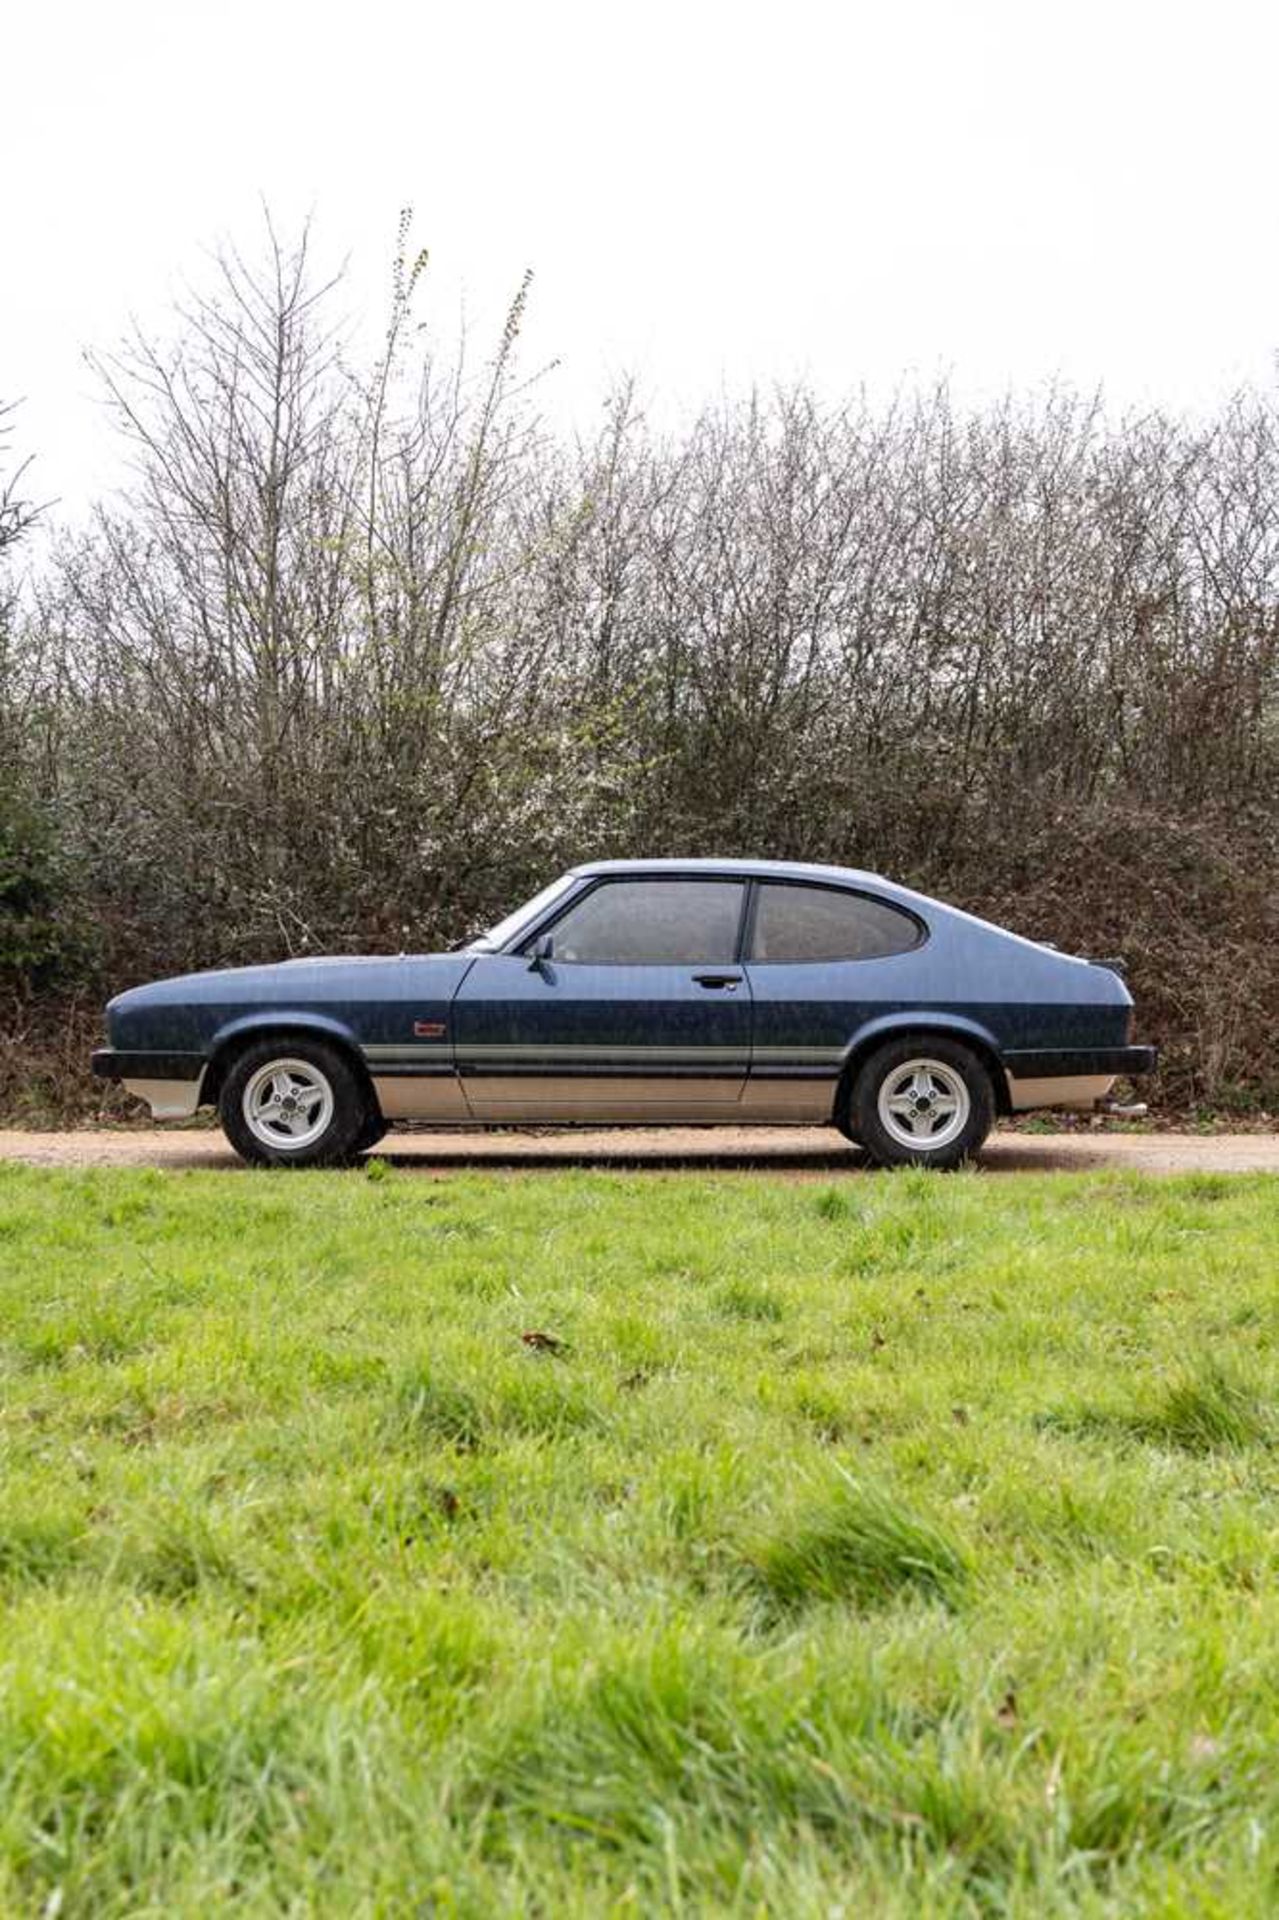 1985 Ford Capri Laser 2.0 Litre Warranted 55,300 miles from new - Image 10 of 67